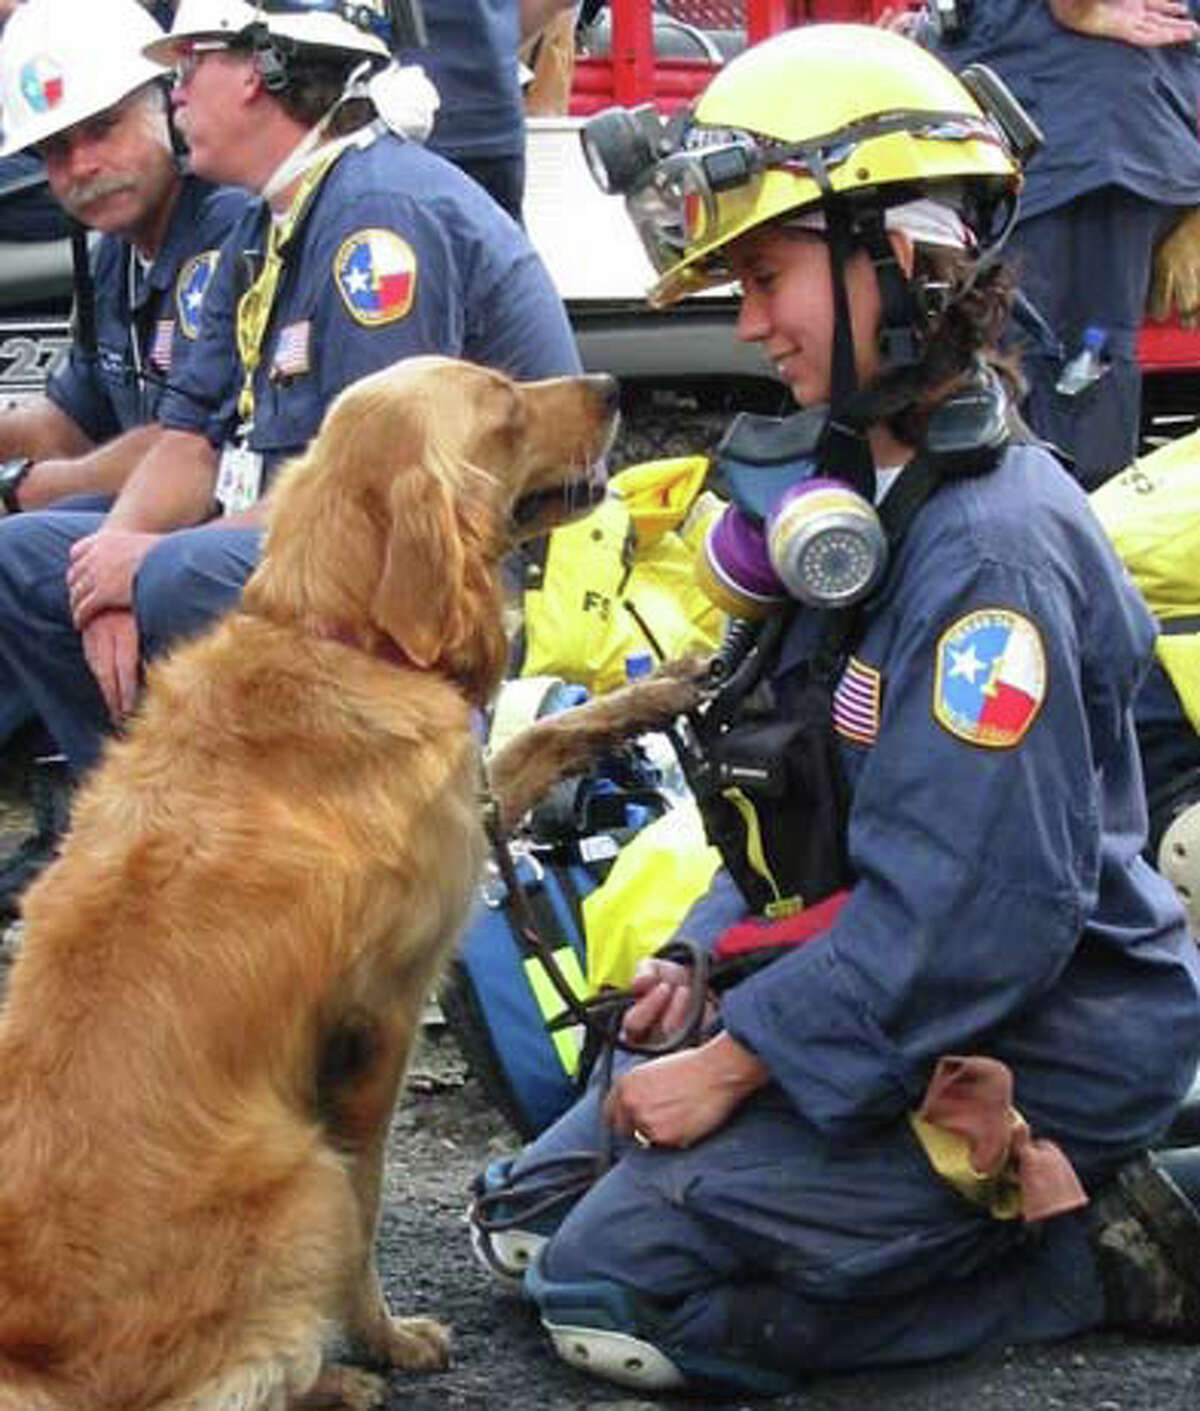 K9 Search Specialist Denise Corliss and her search dog Bretagne went to Ground Zero in New York City to work the site of the World Trade Center terrorist attack.